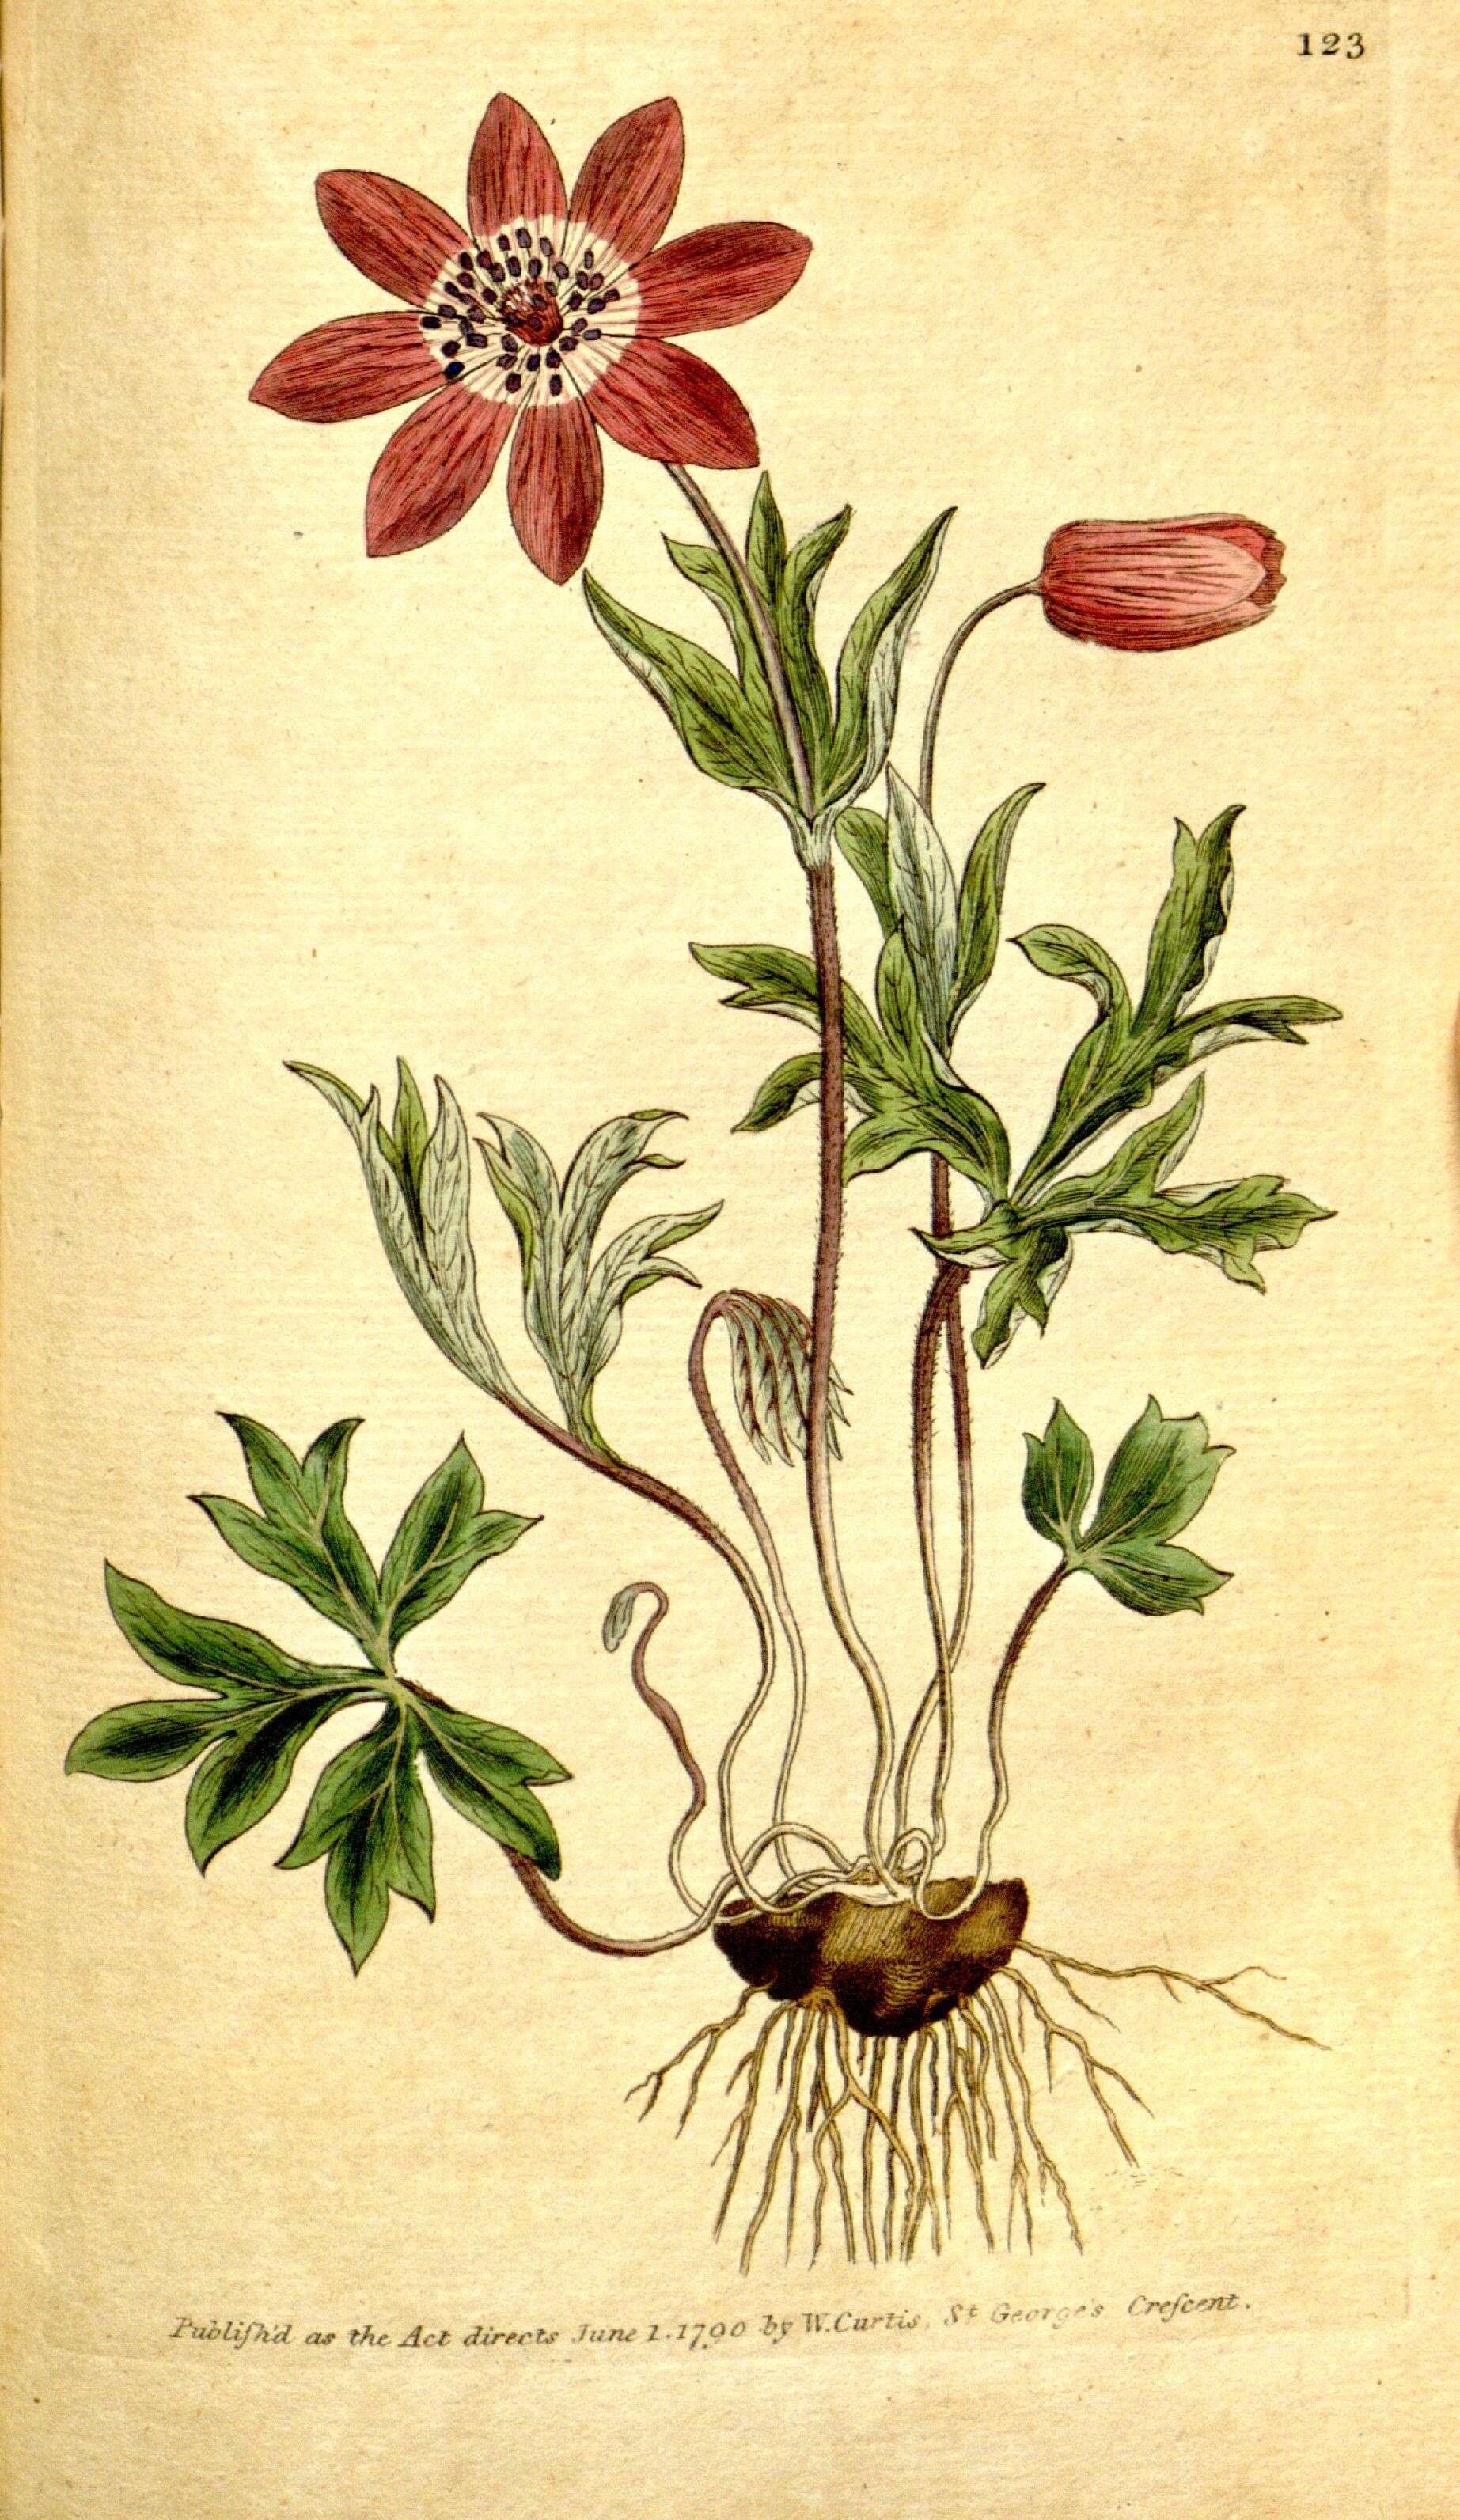 Image of broad-leaved anemone